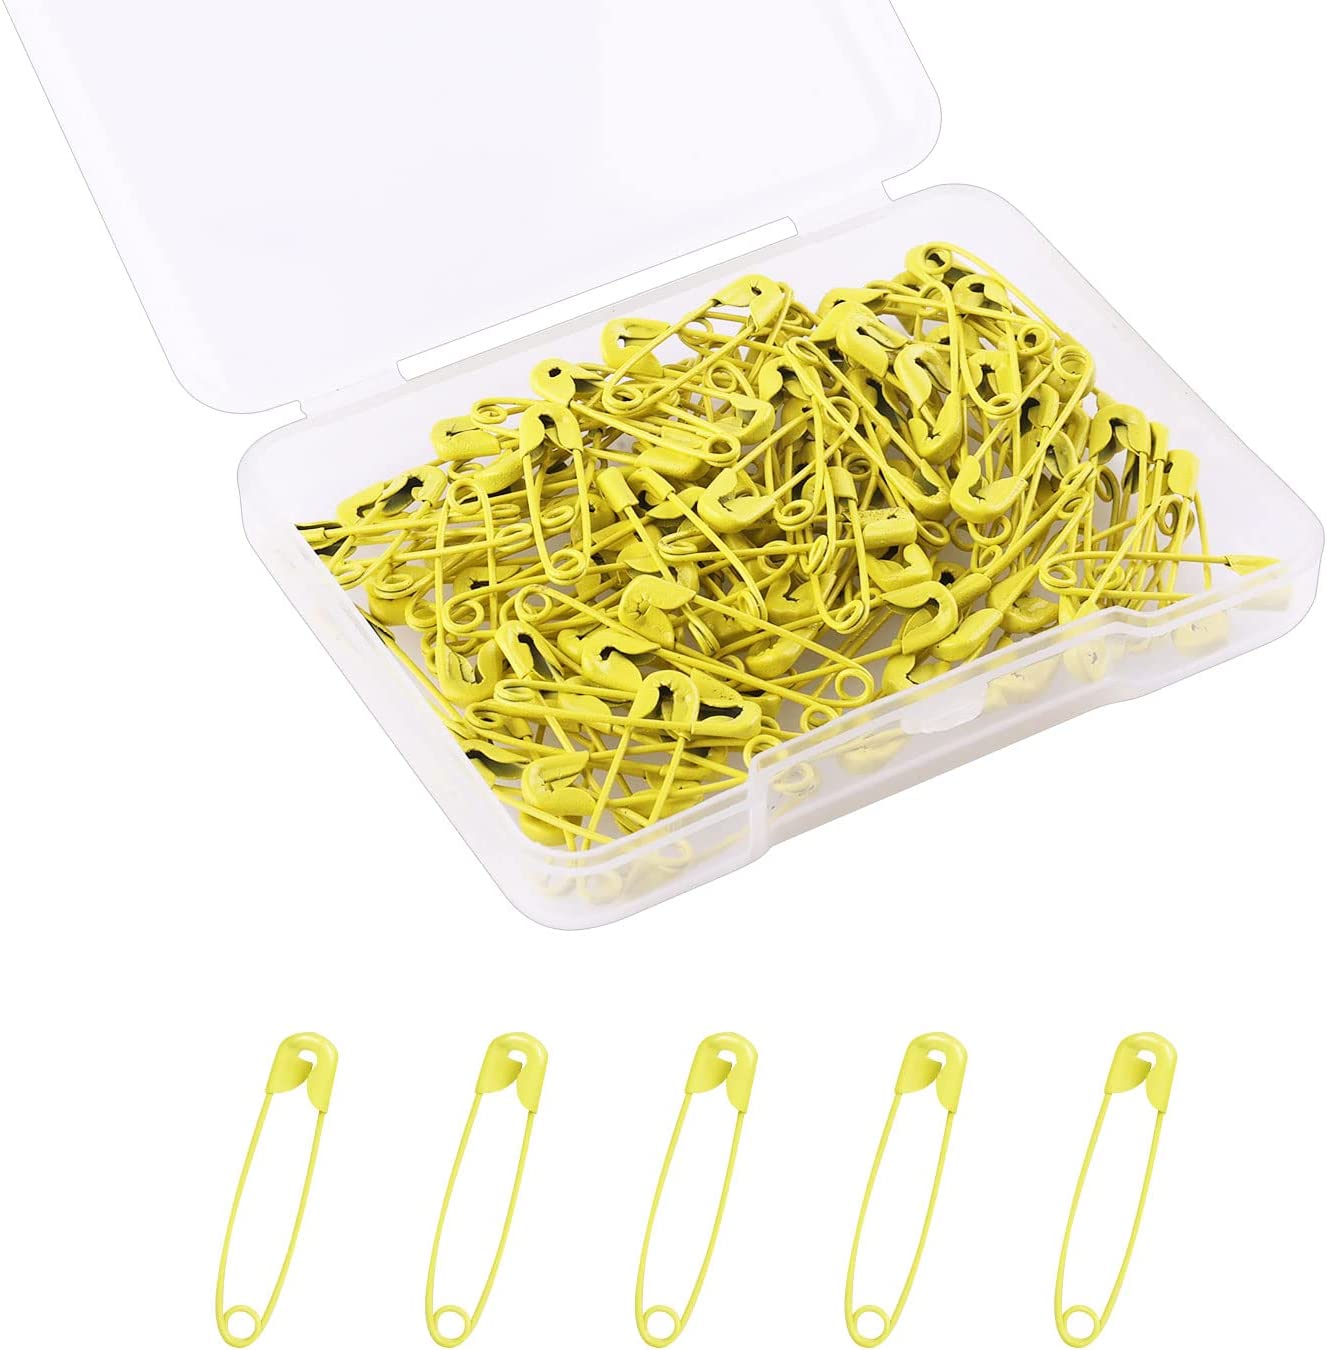 120 Pcs 19mm Safety Pins, Mini Safety Pins Metal Safety Pins for Art Craft  Sewing Jewelry Making (Yellow)